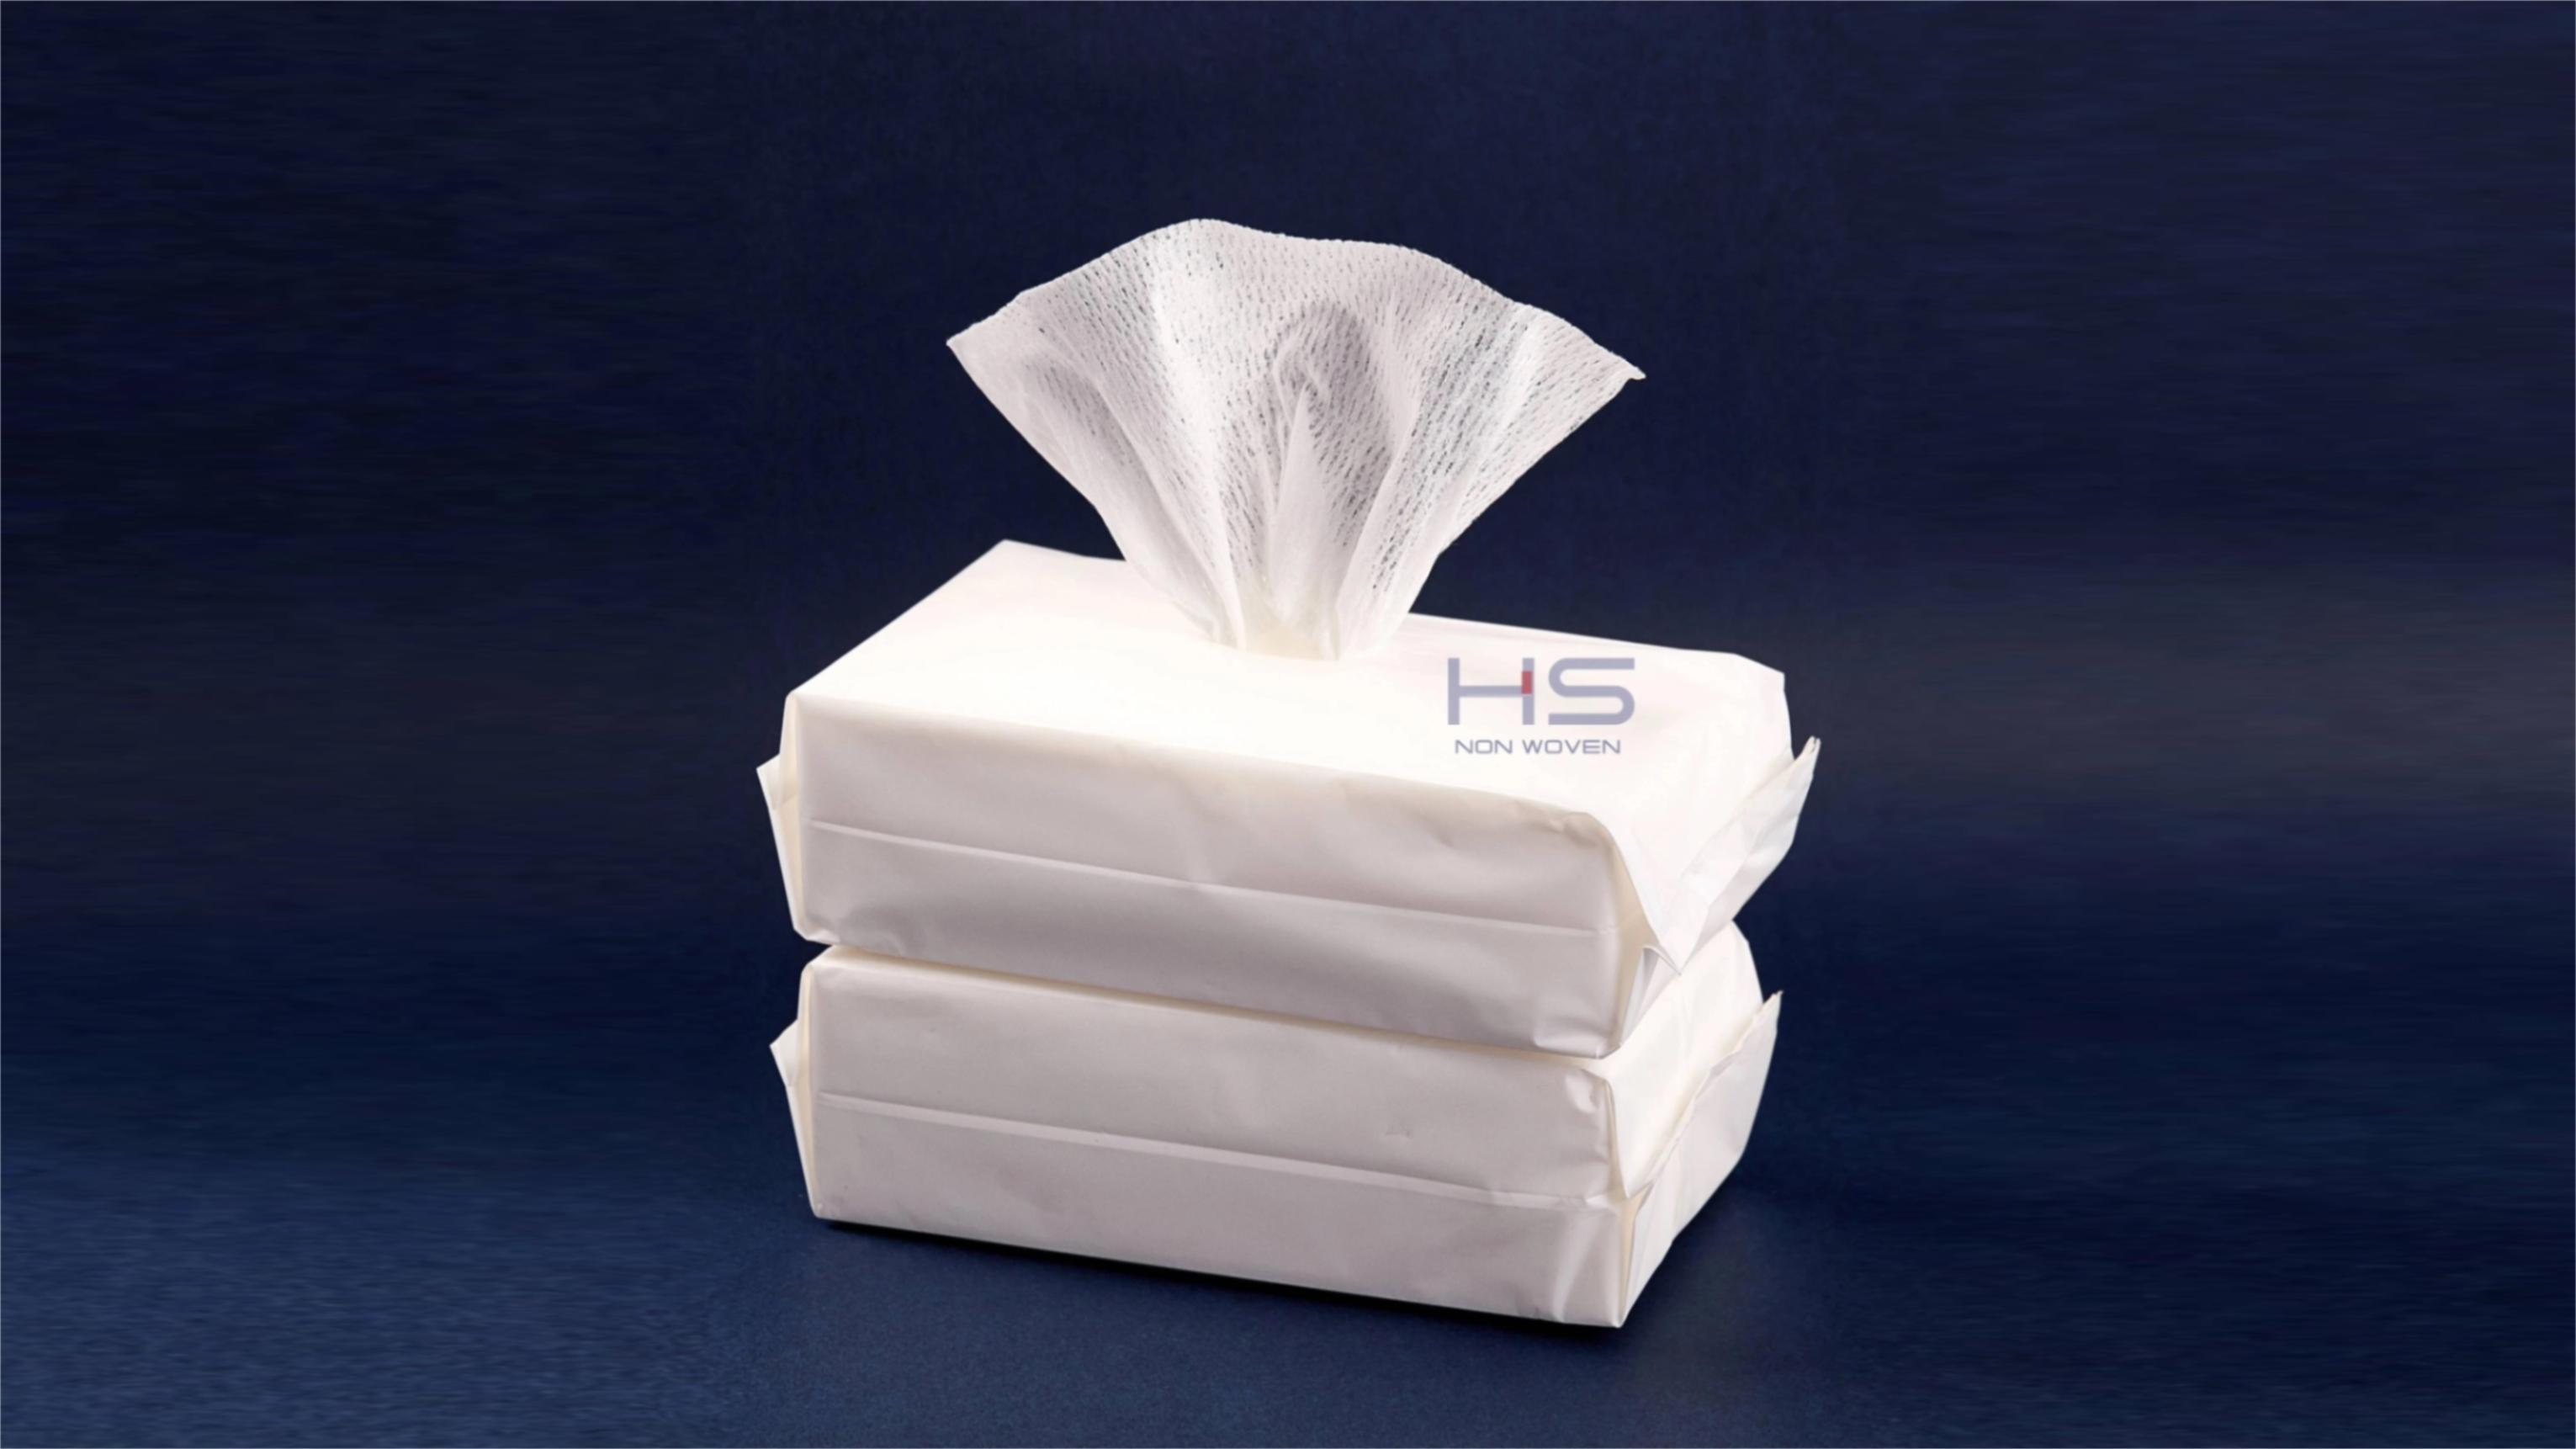 https://www.hsnonwoven.com/facial-dry-towel-product/